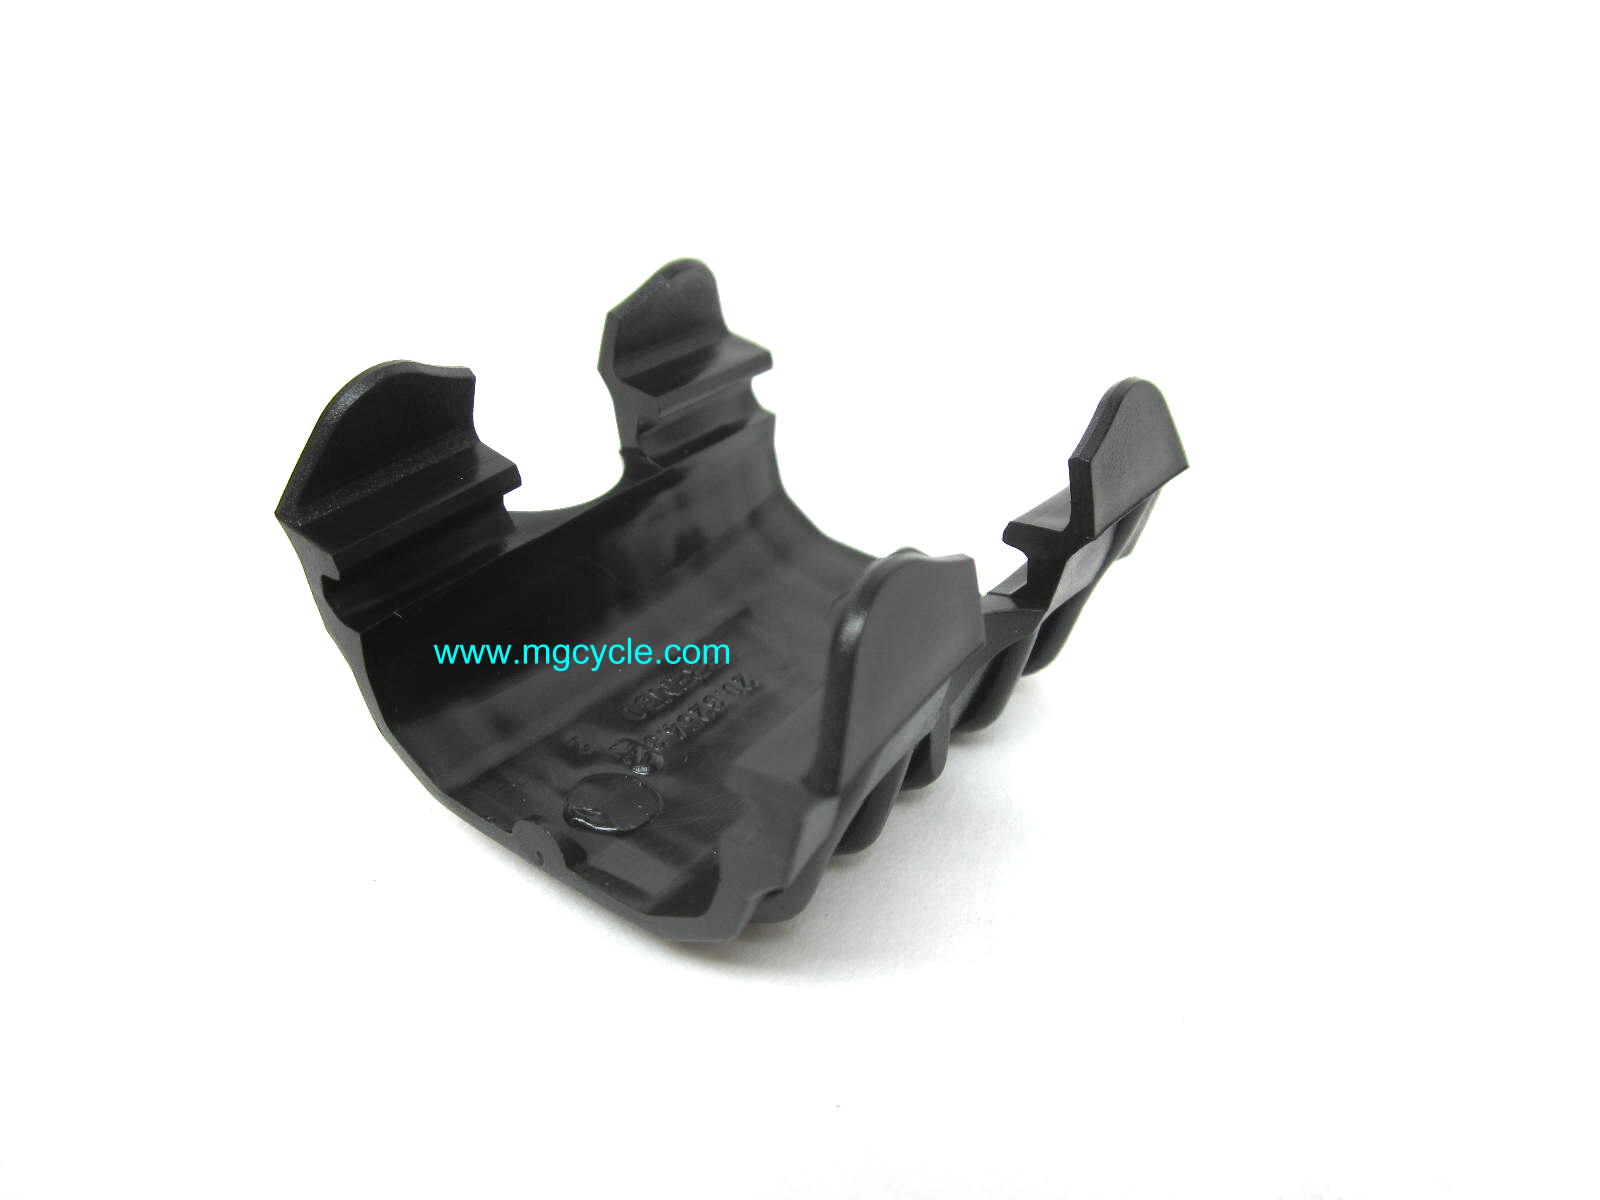 Brembo caliper cover for P2 F08 calipers with 2 nipples